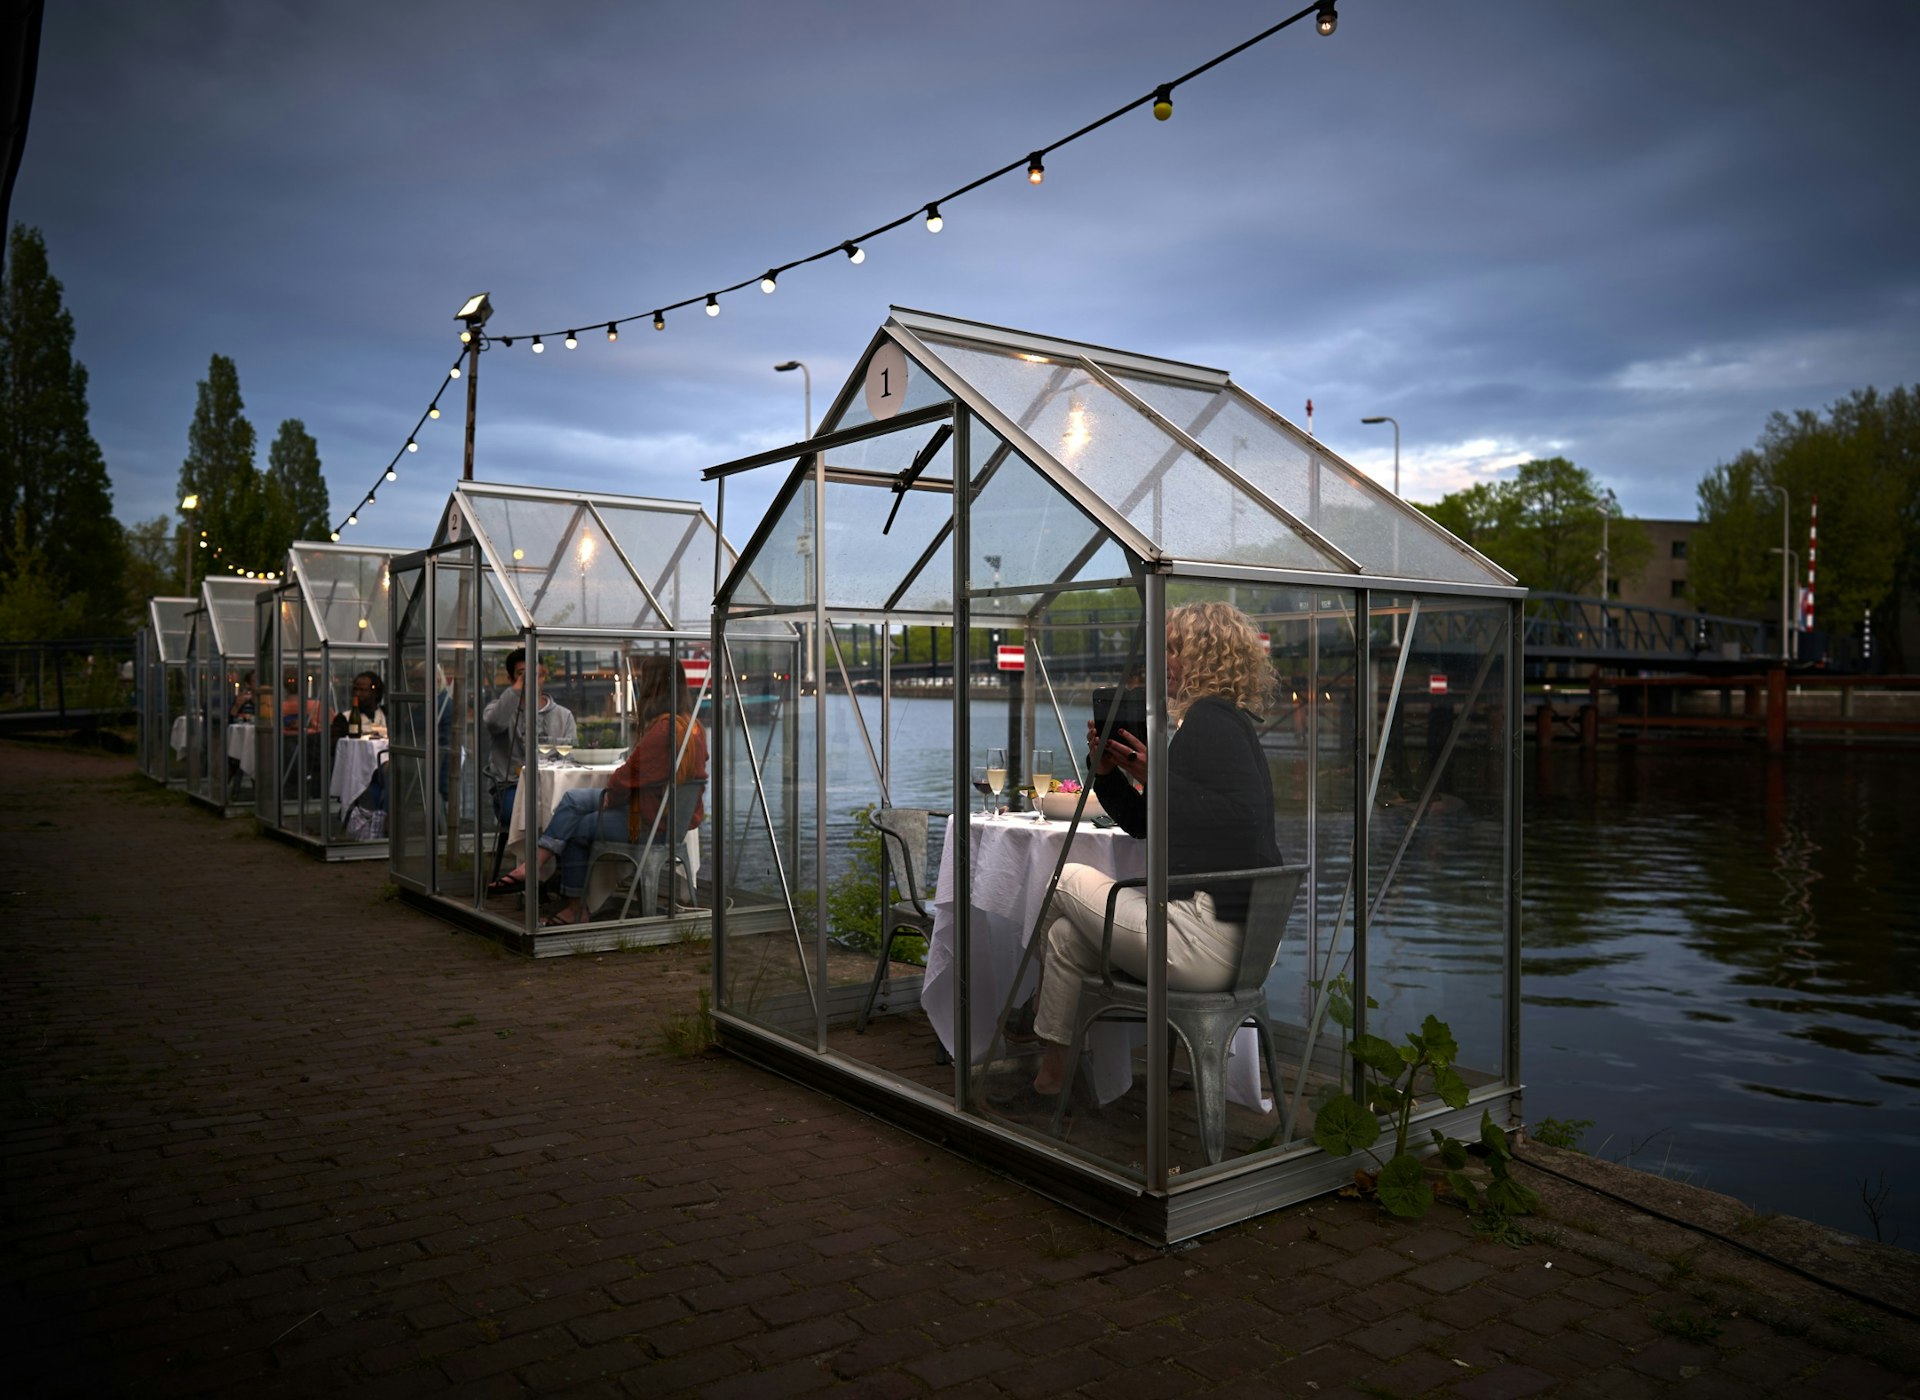 Diners inside glass greenhouses that are used for social distancing